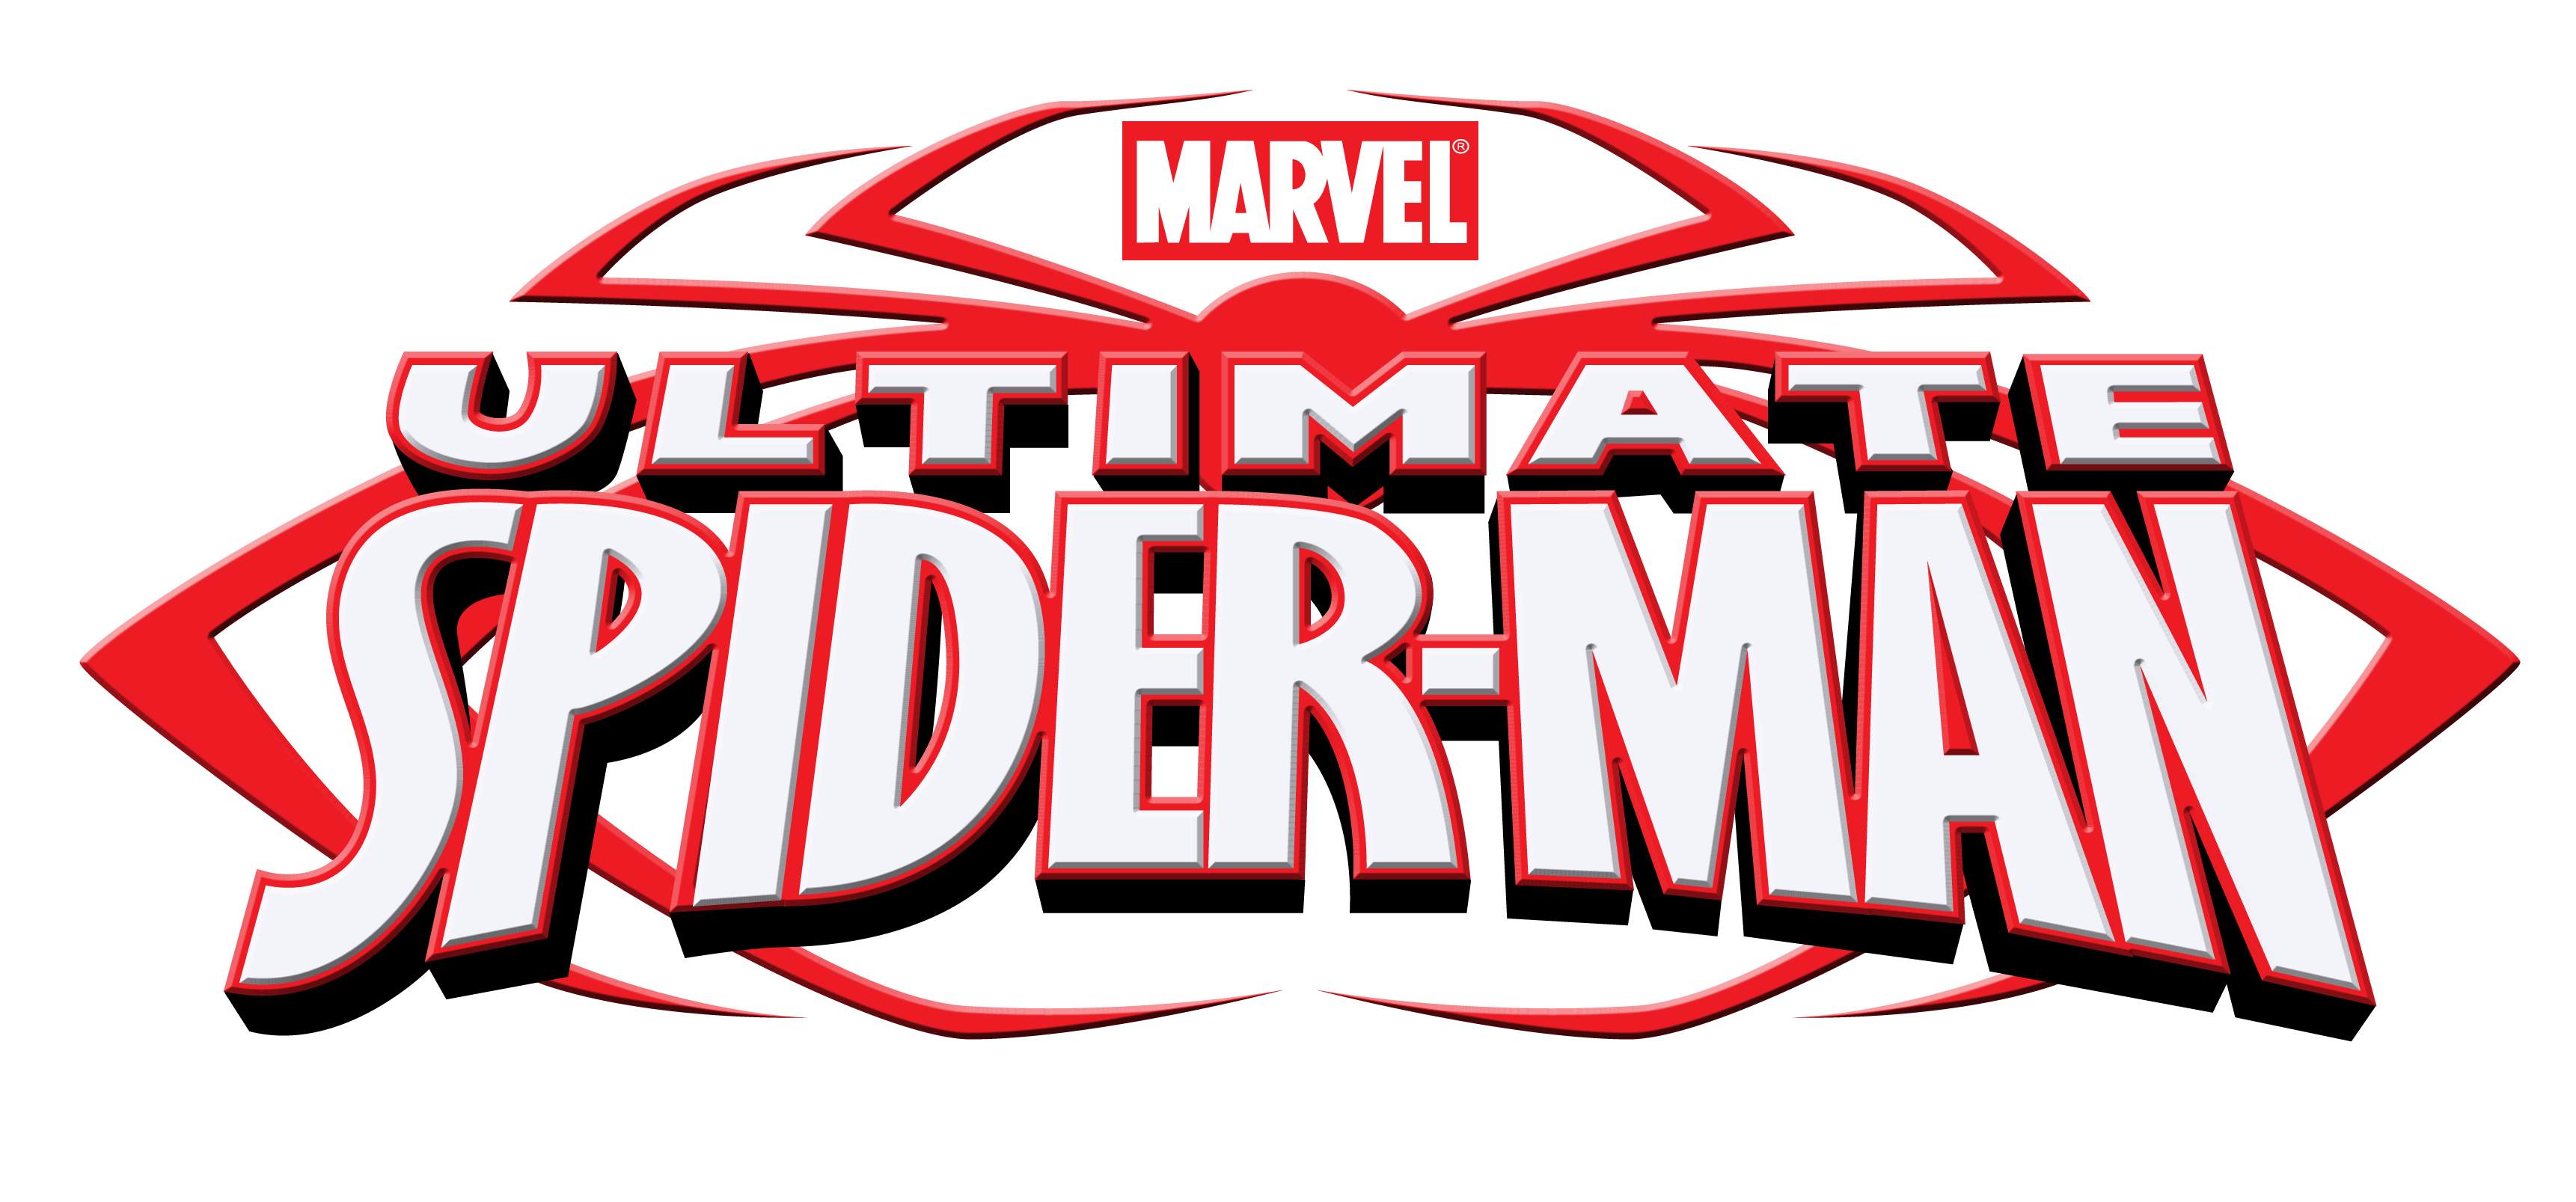 Ultimate Spider-Man - Logopedia, the logo and branding site